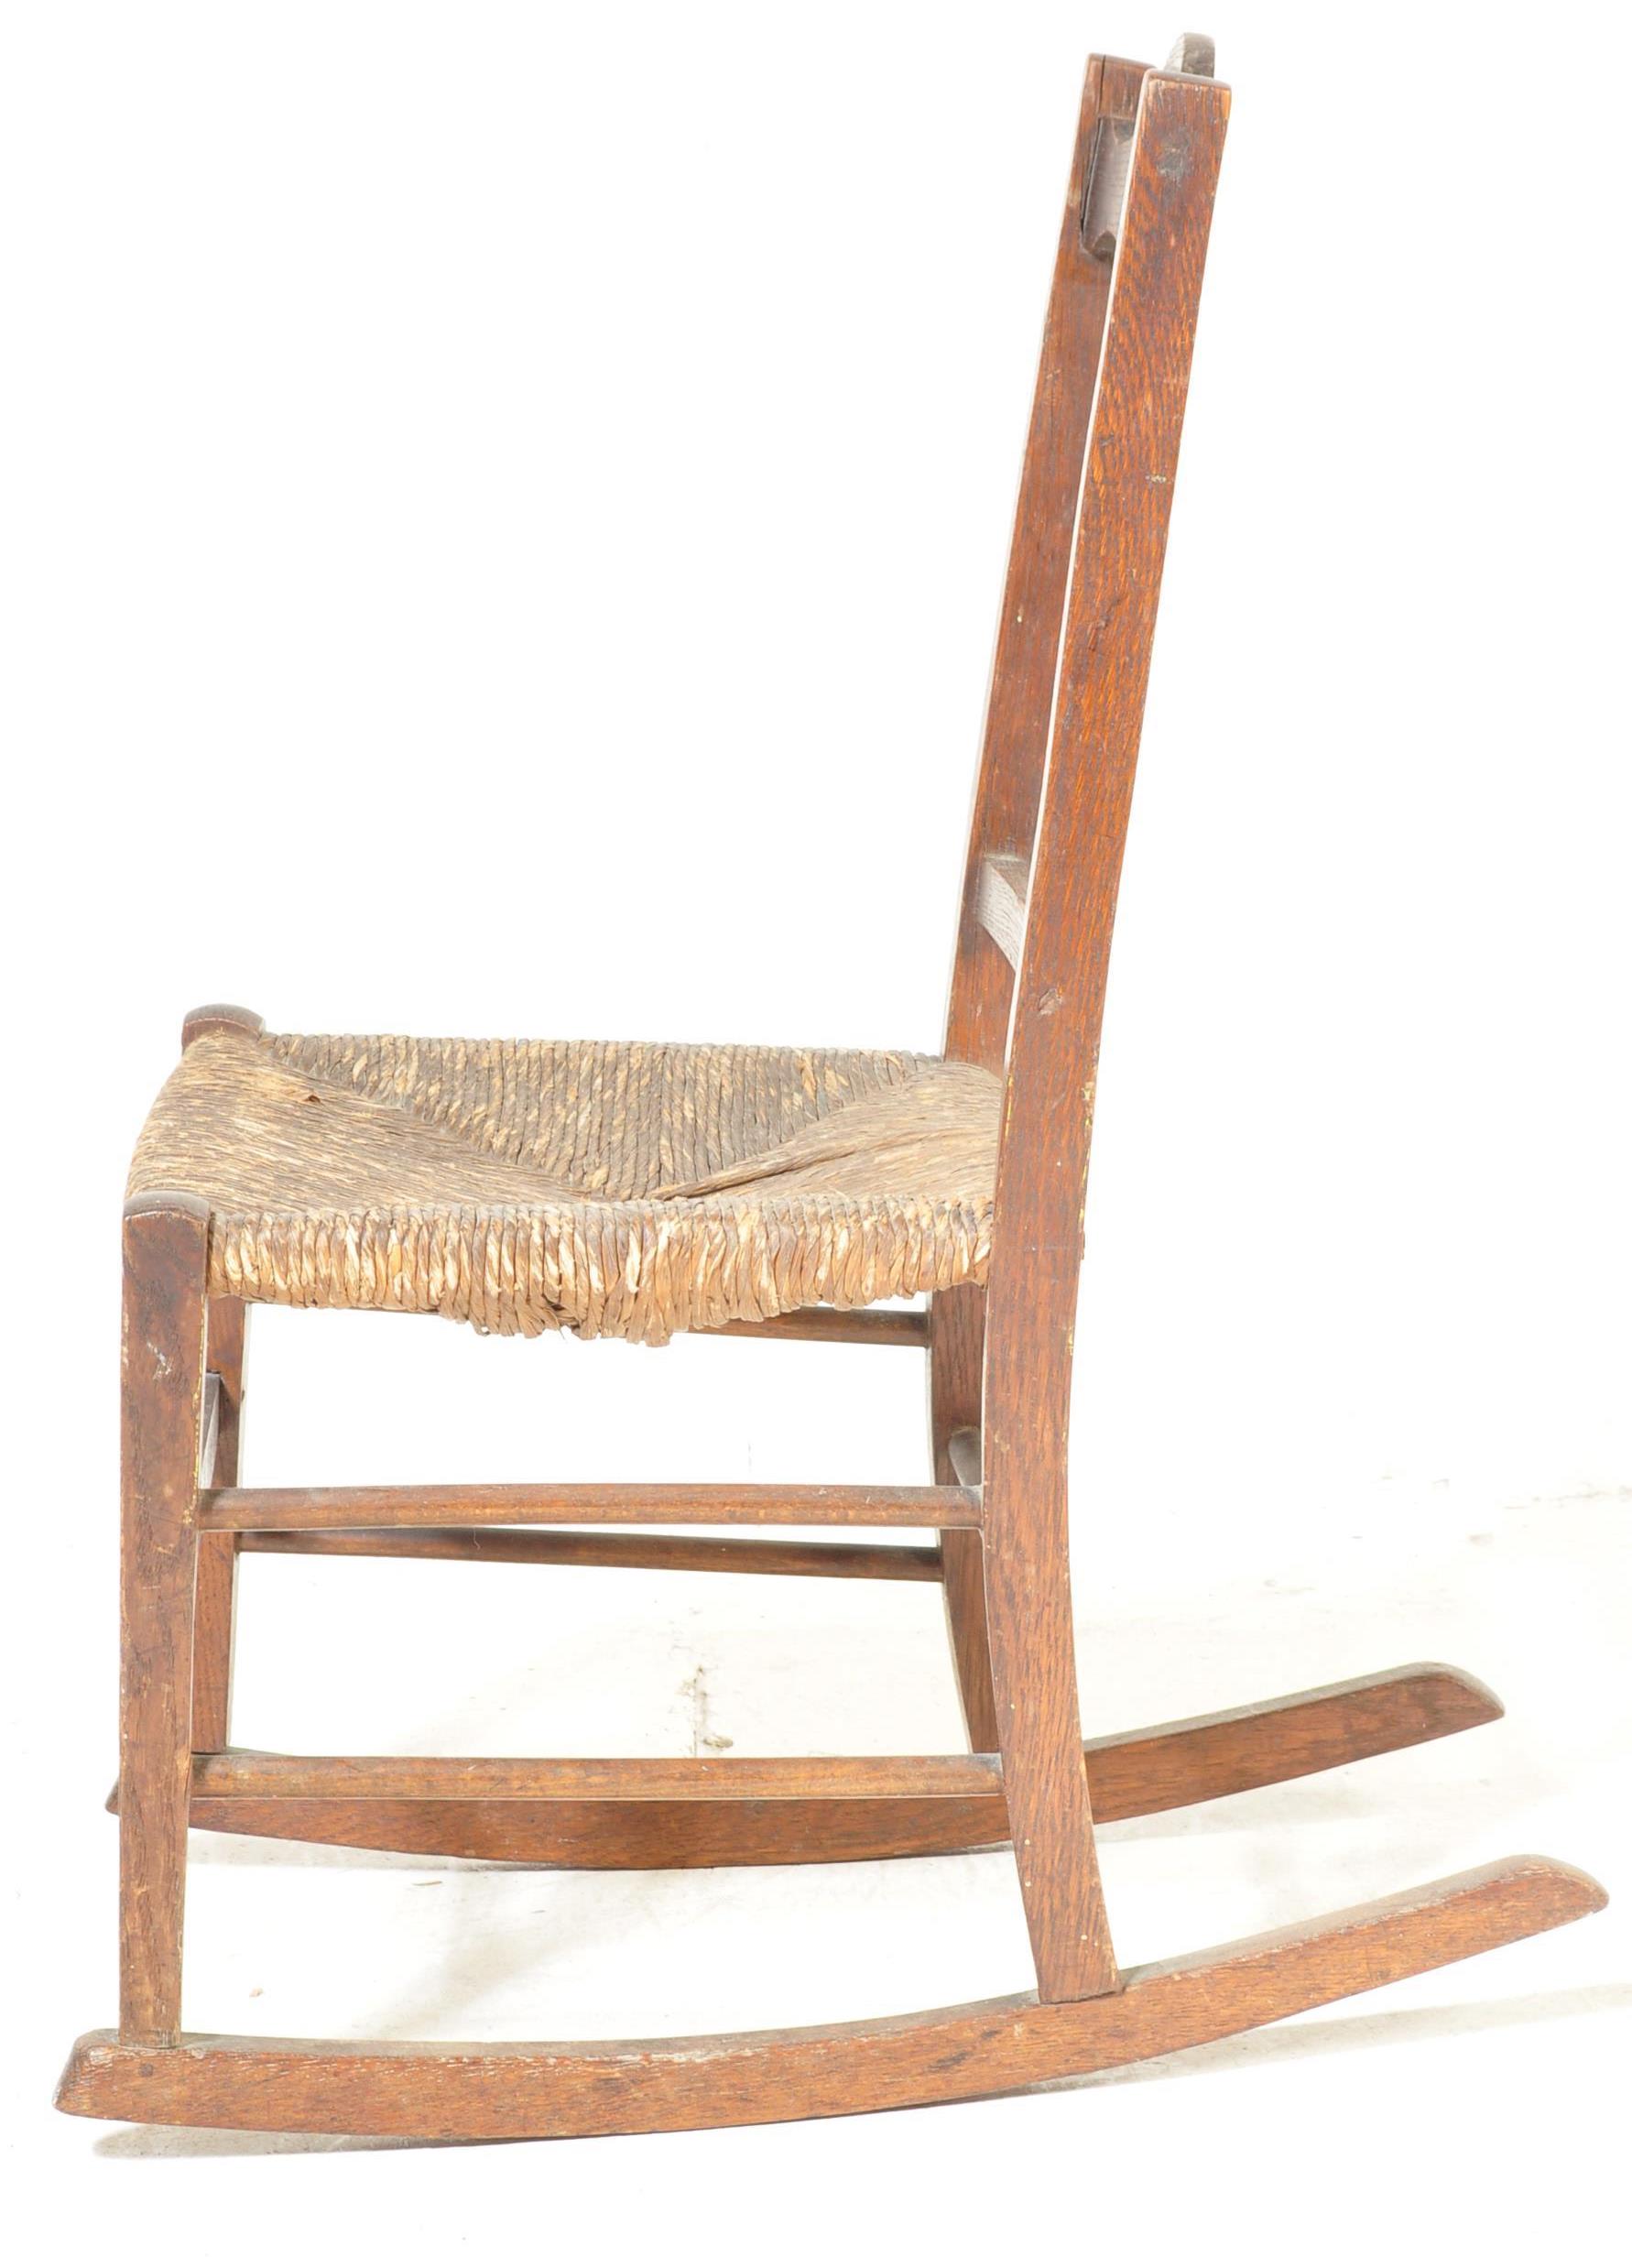 LATE 19TH CENTURY ARTS & CRAFTS CHILDS ROCKING CHAIR - Image 5 of 6